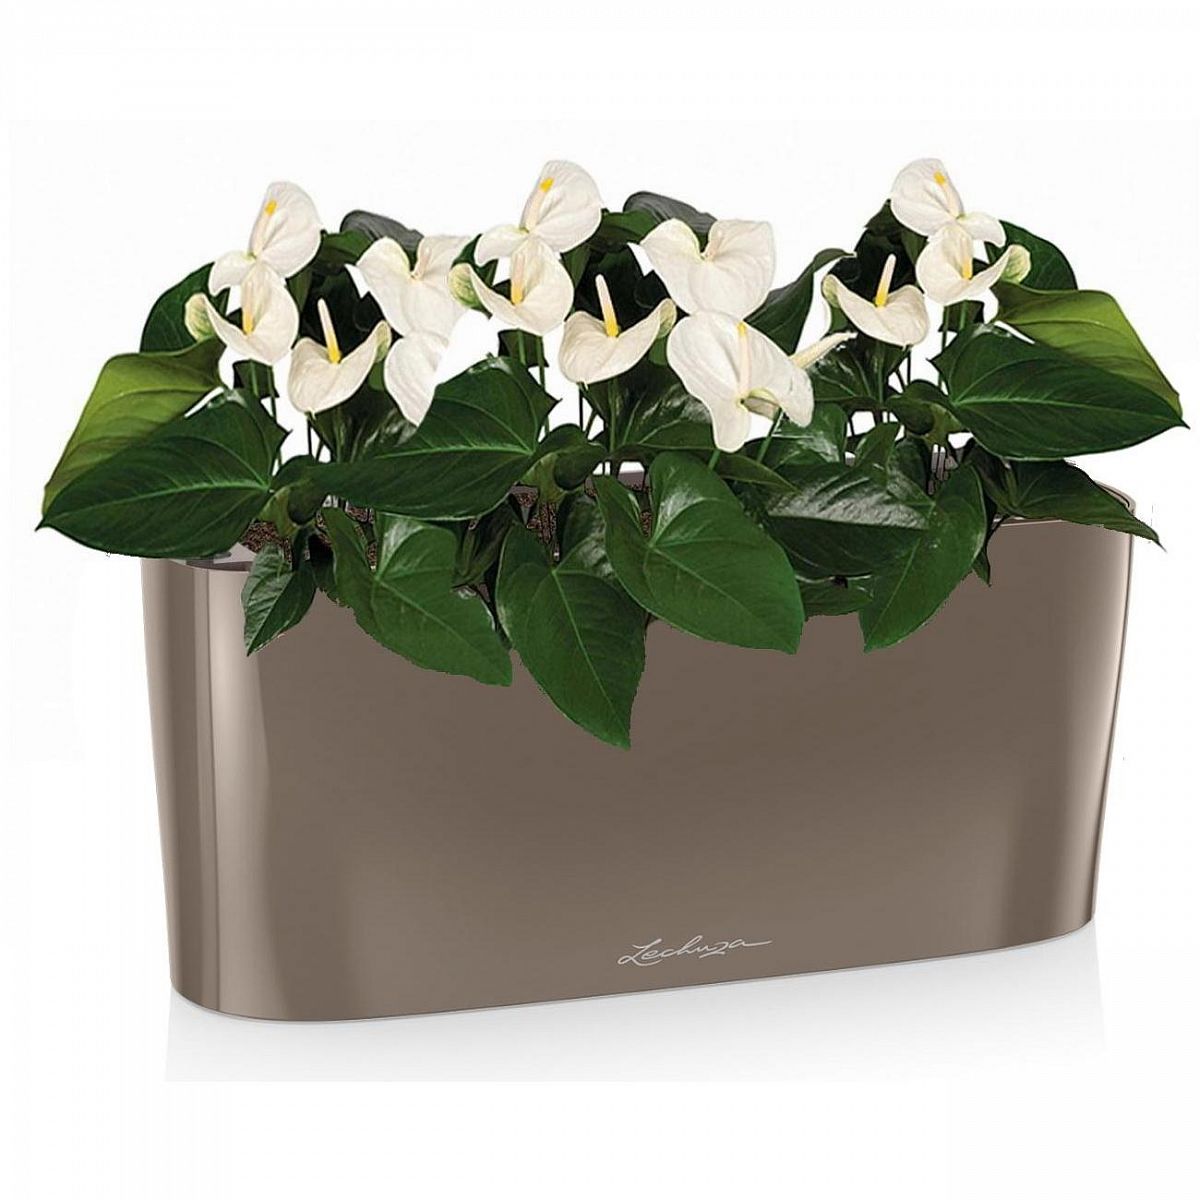 Blooming Anthurium Andraeanum White in LECHUZA DELTA Self-watering Planter, Total Height 45 cm